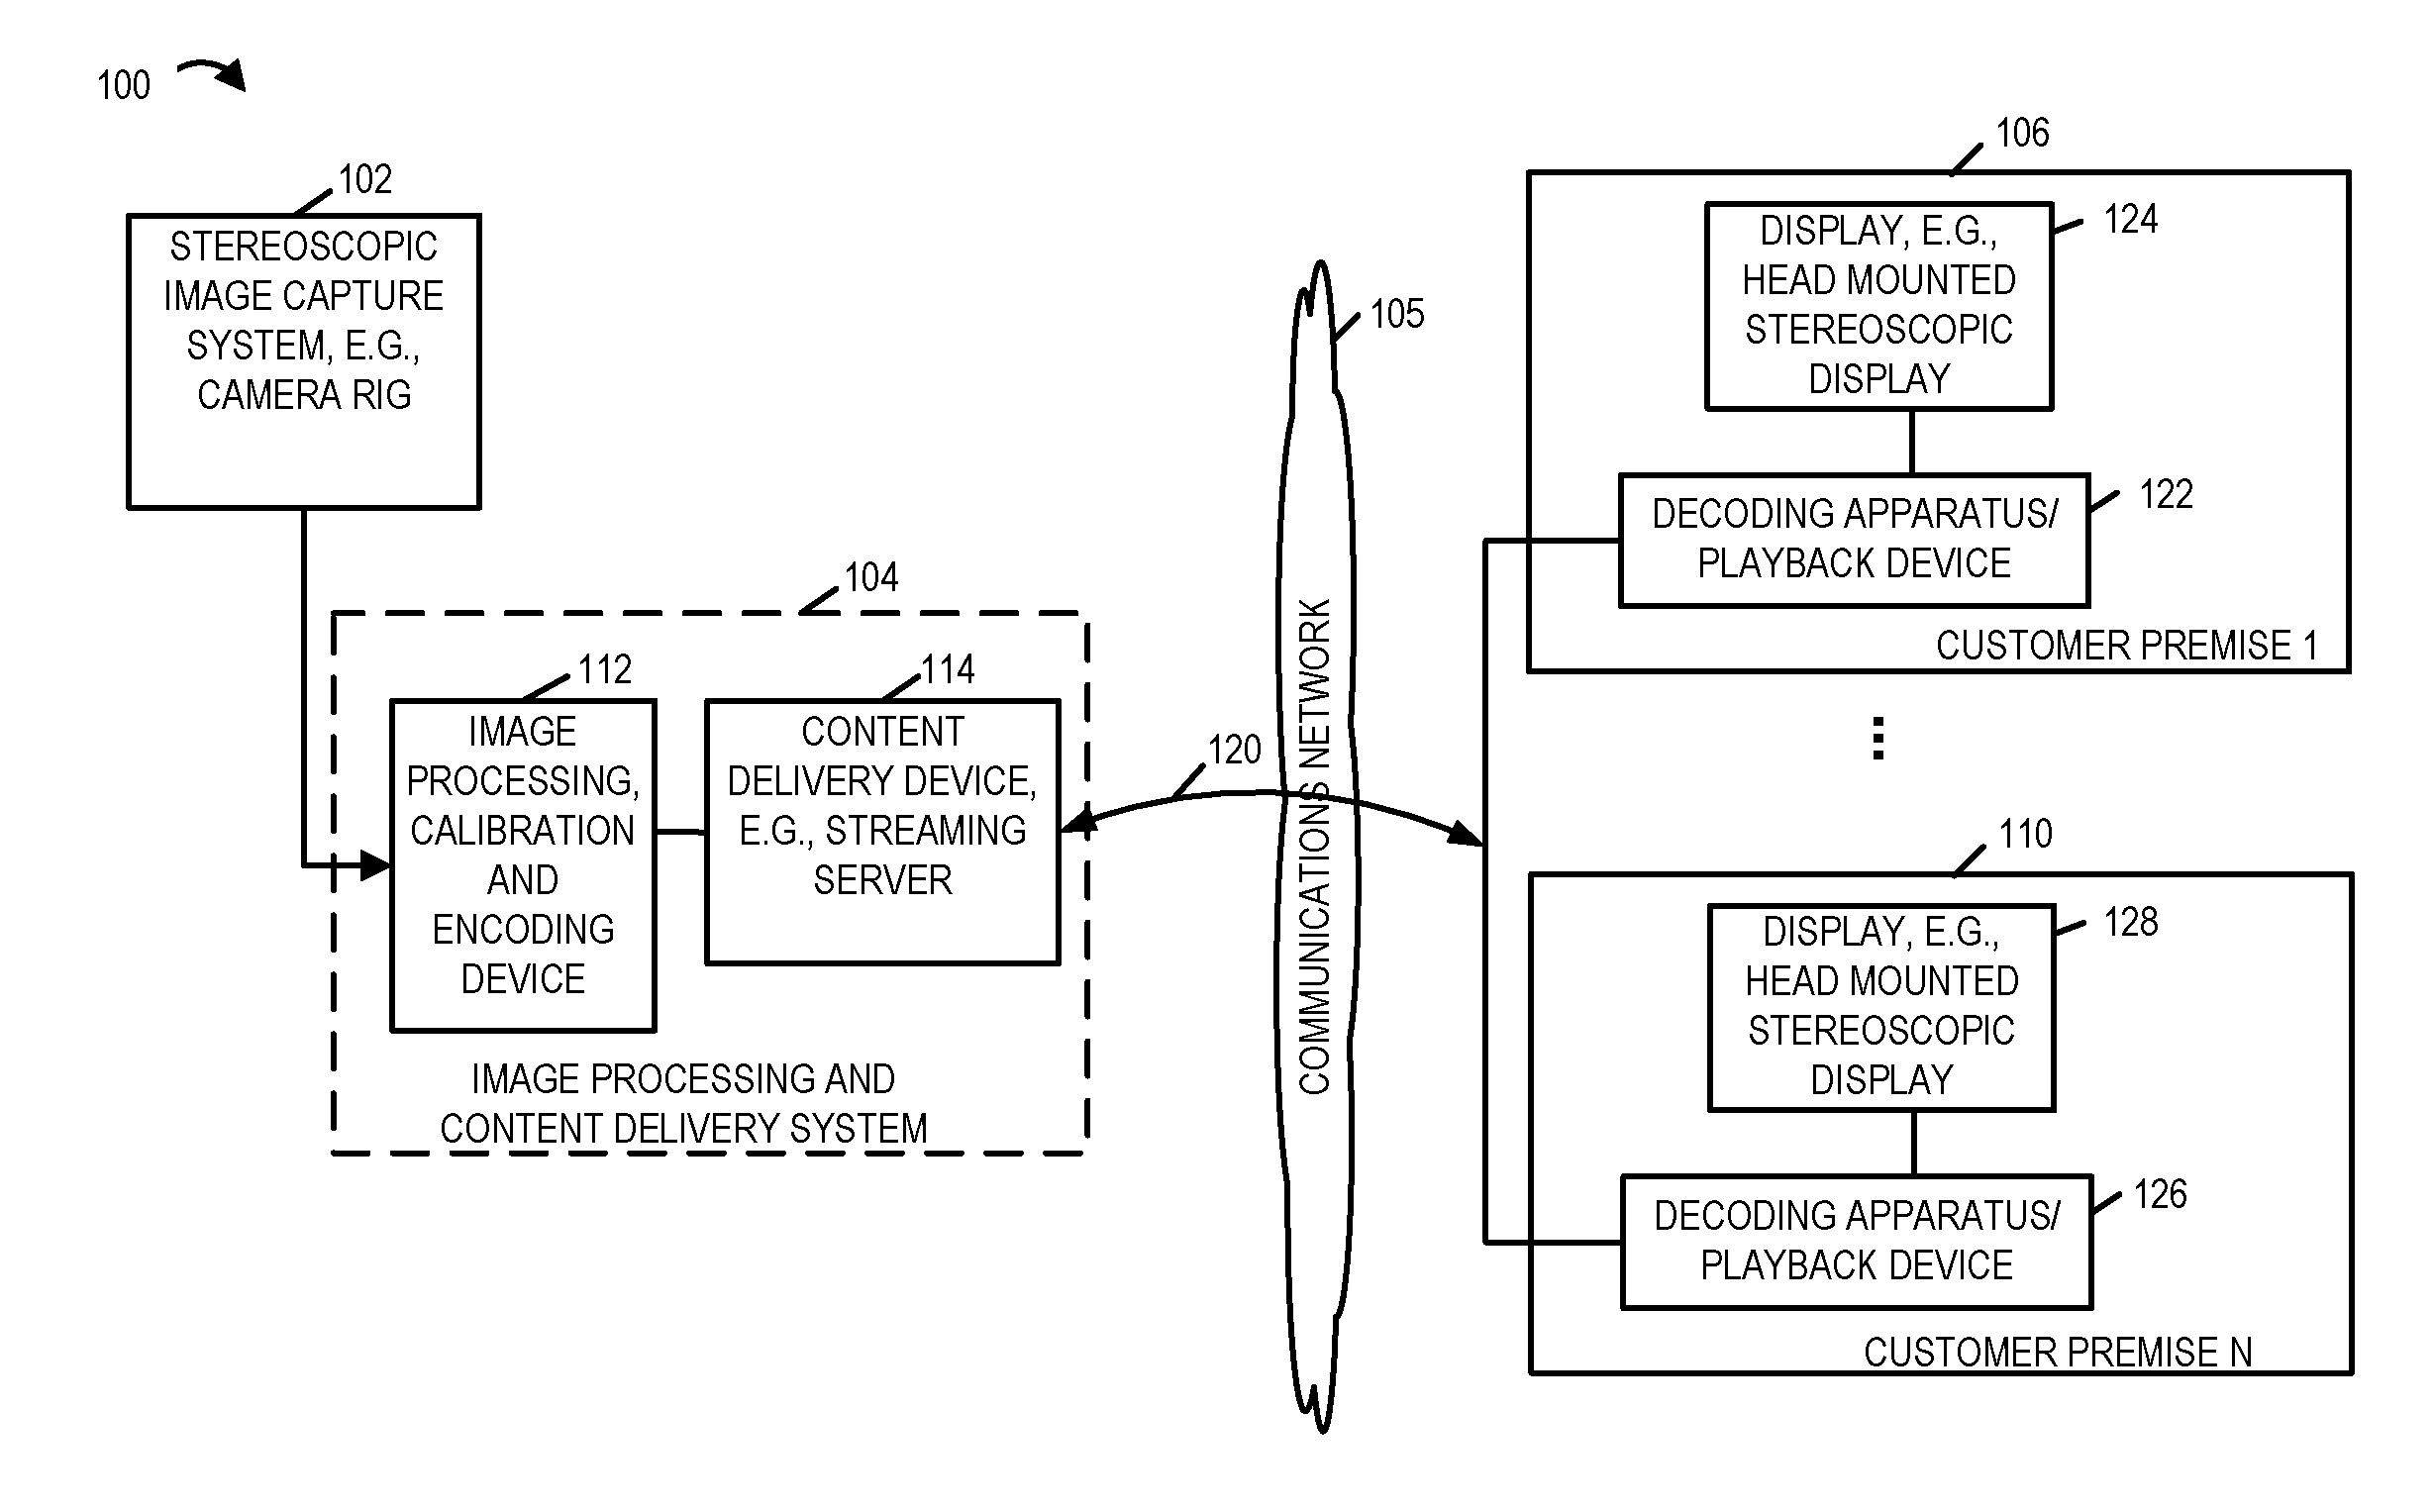 Methods and apparatus for generating and using reduced resolution images and/or communicating such images to a playback or content distribution device